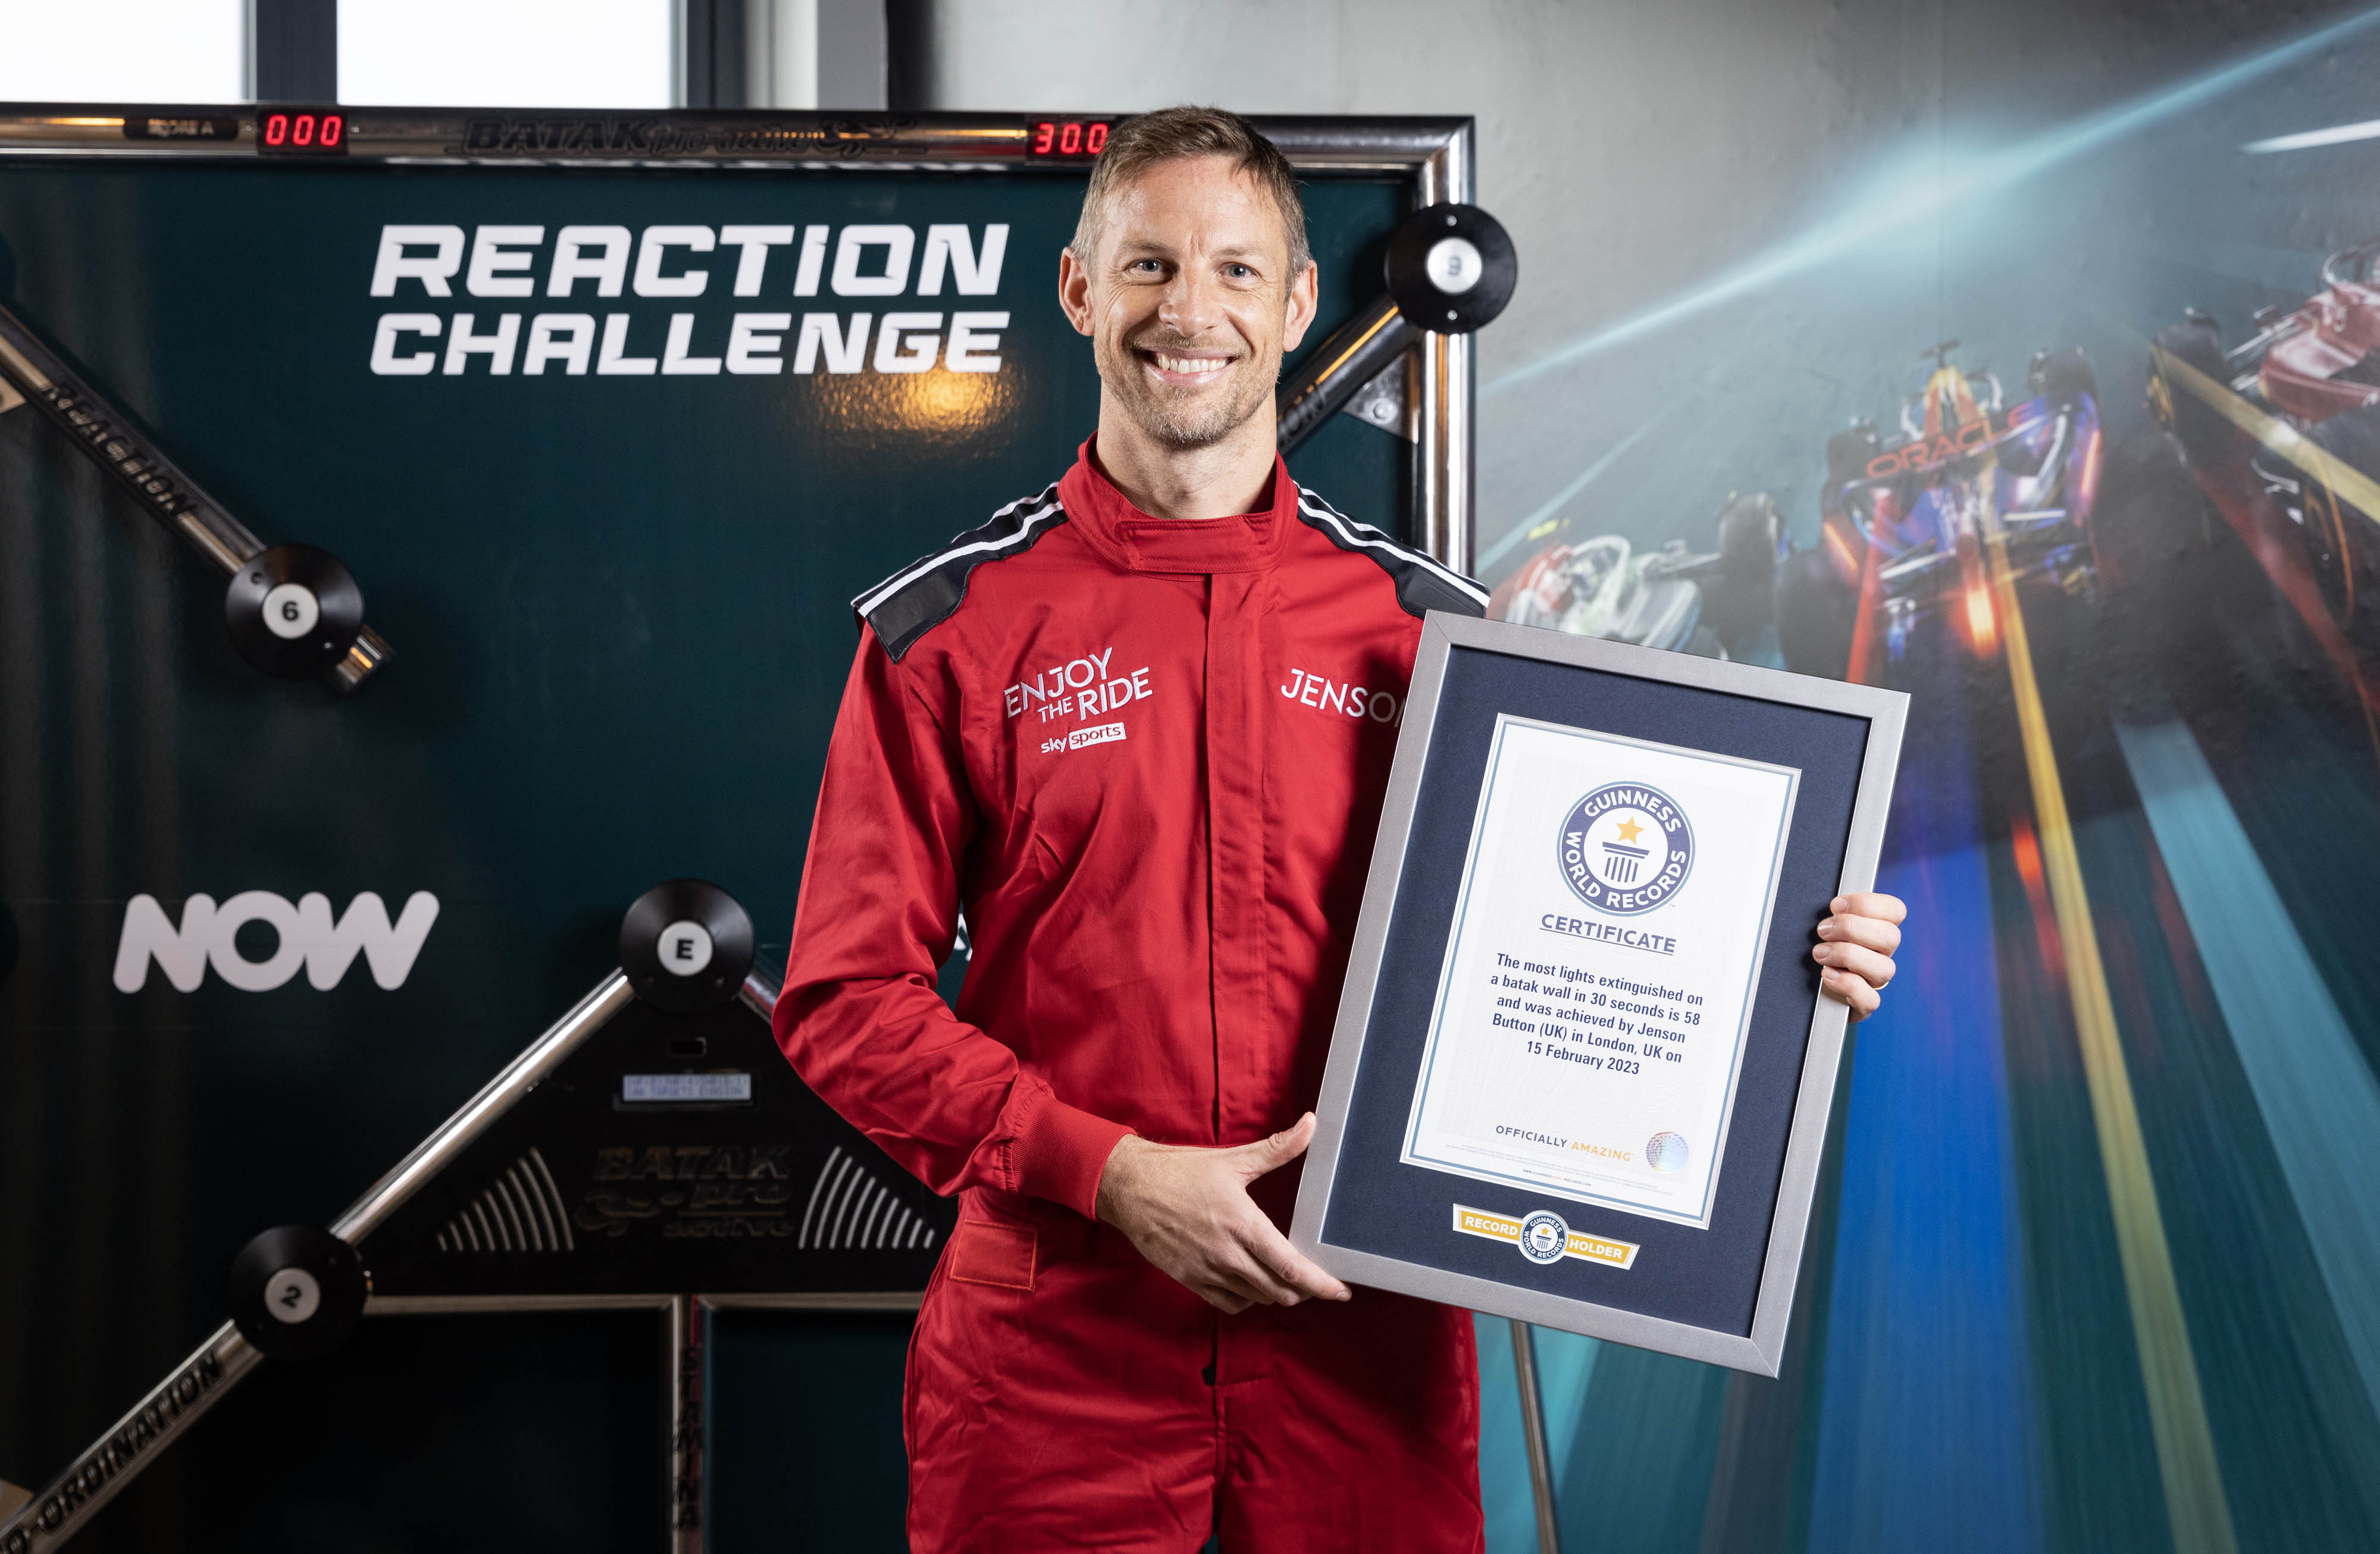 F1 legend Jenson Button breaks world record reflex challenge with NOW Famous Campaigns